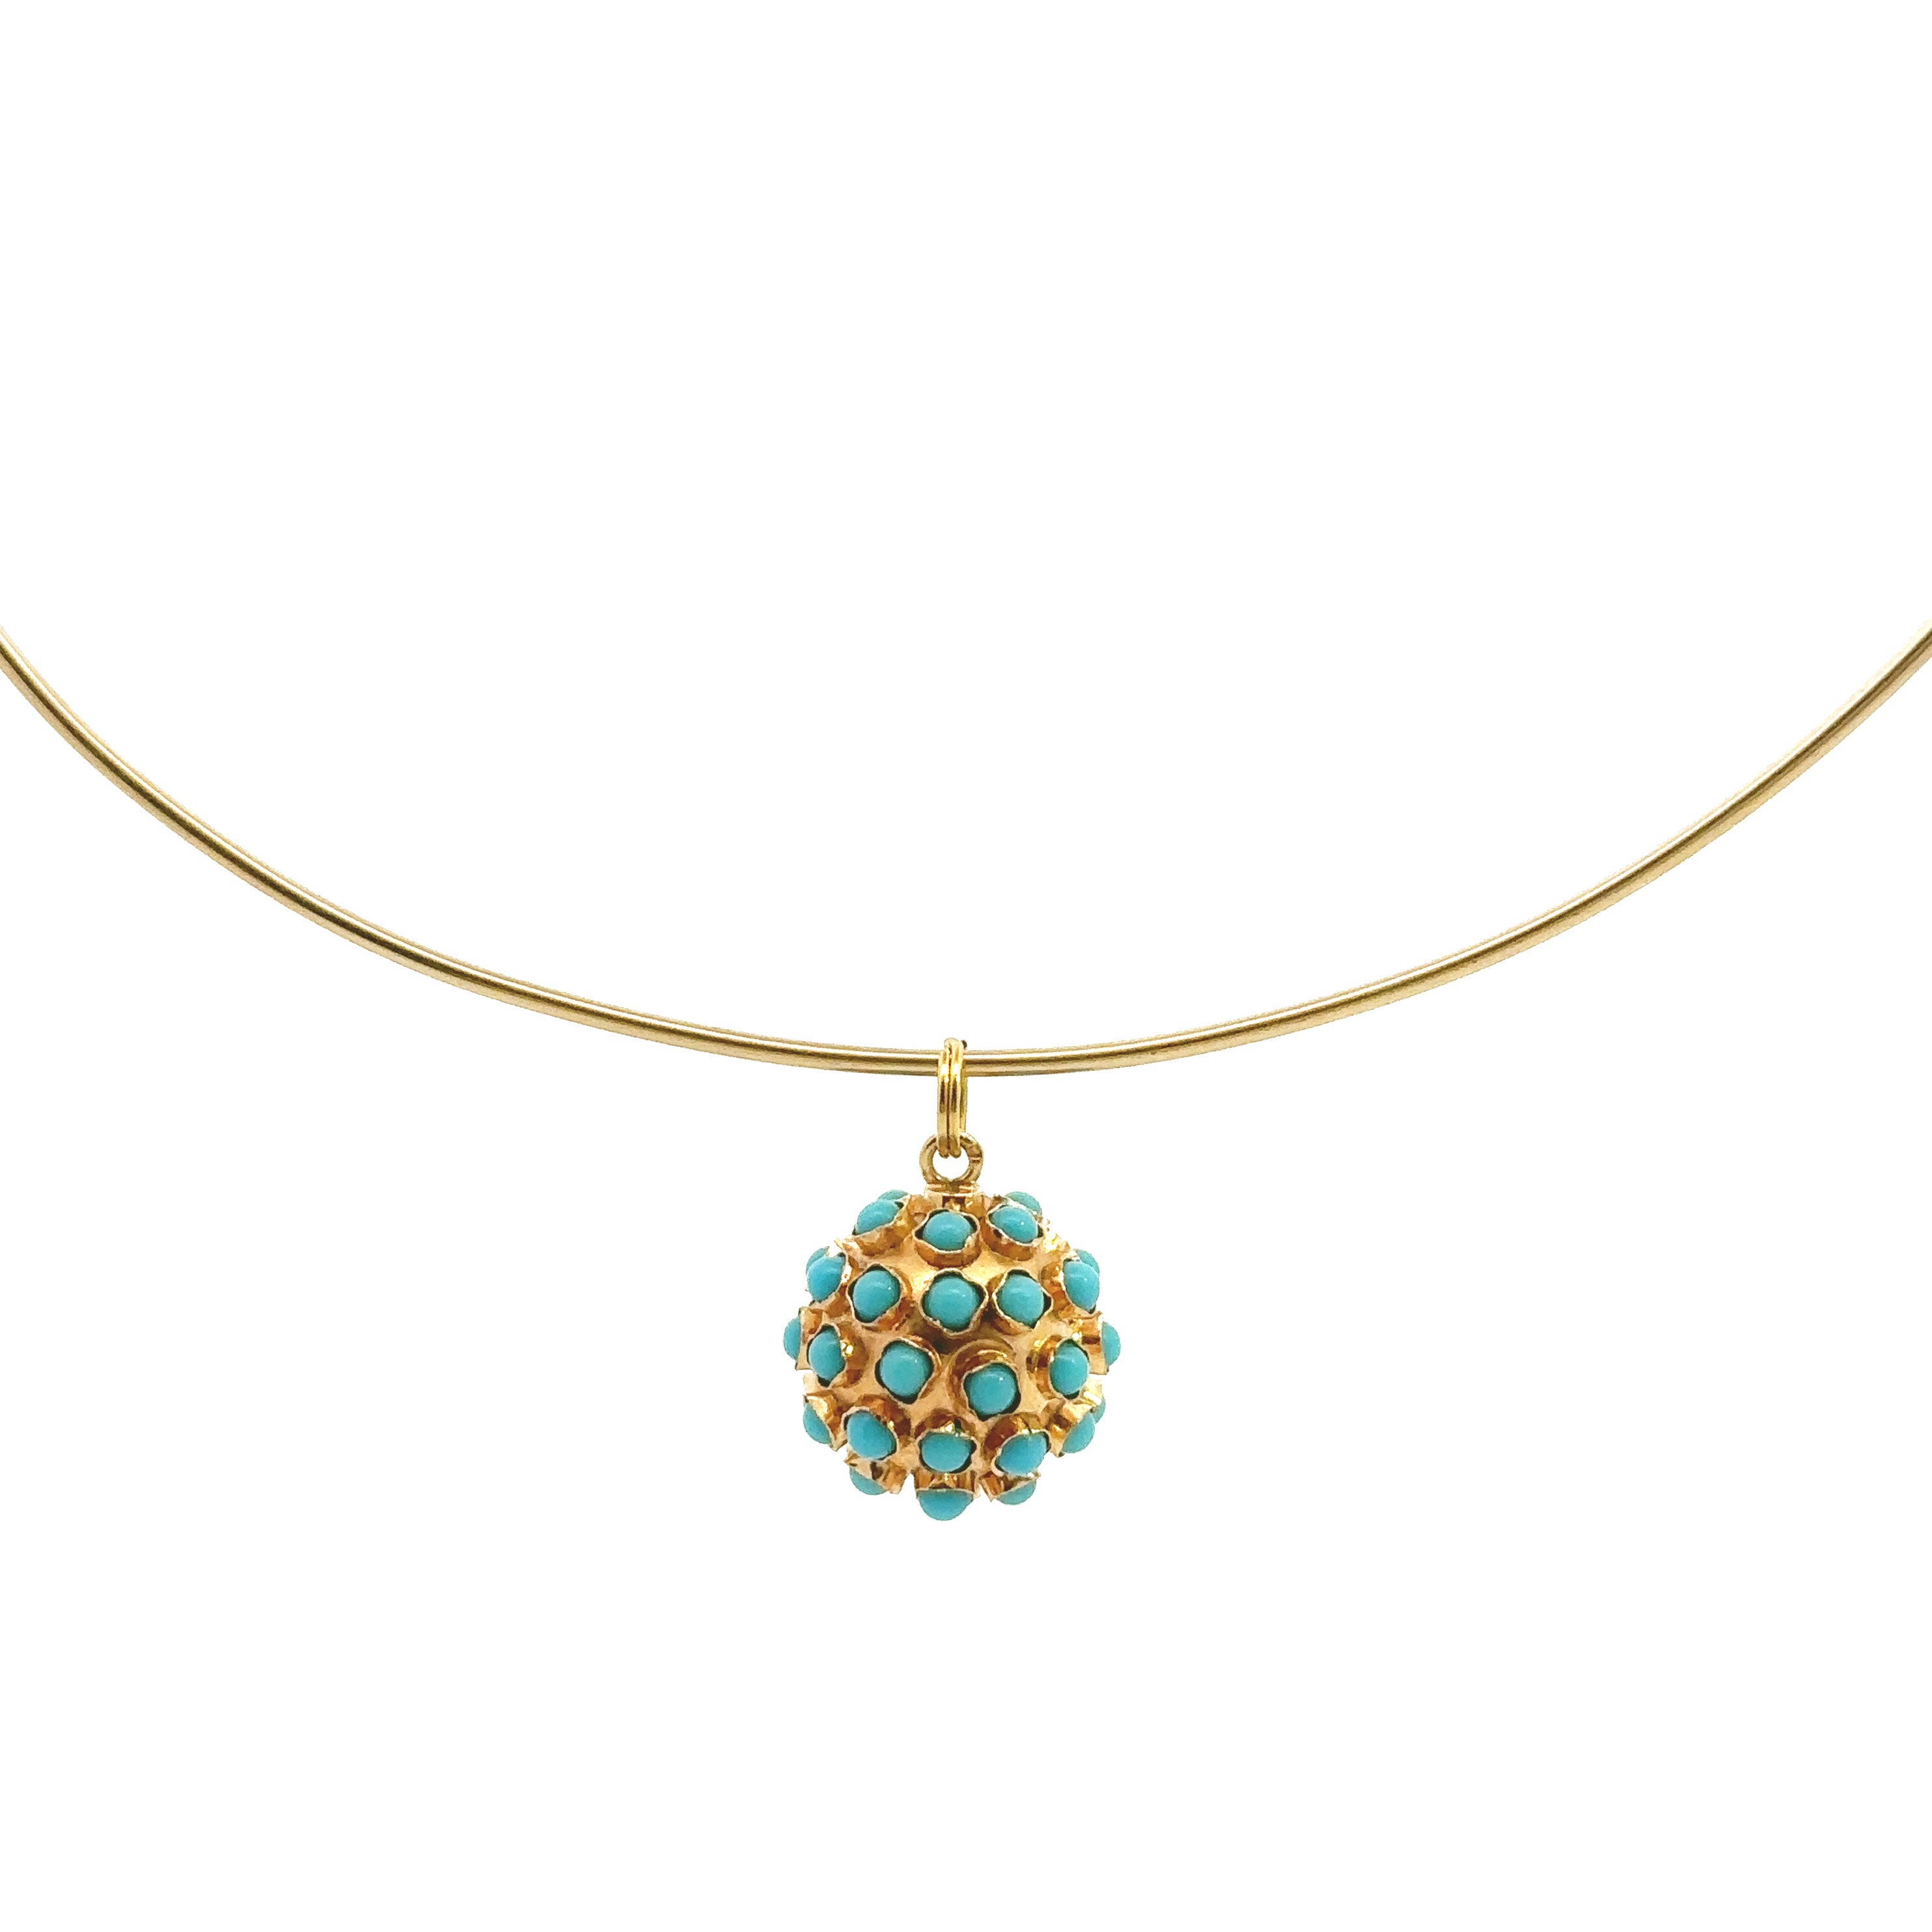 Vintage Gold and Turquoise Ball Charm - Be On Park